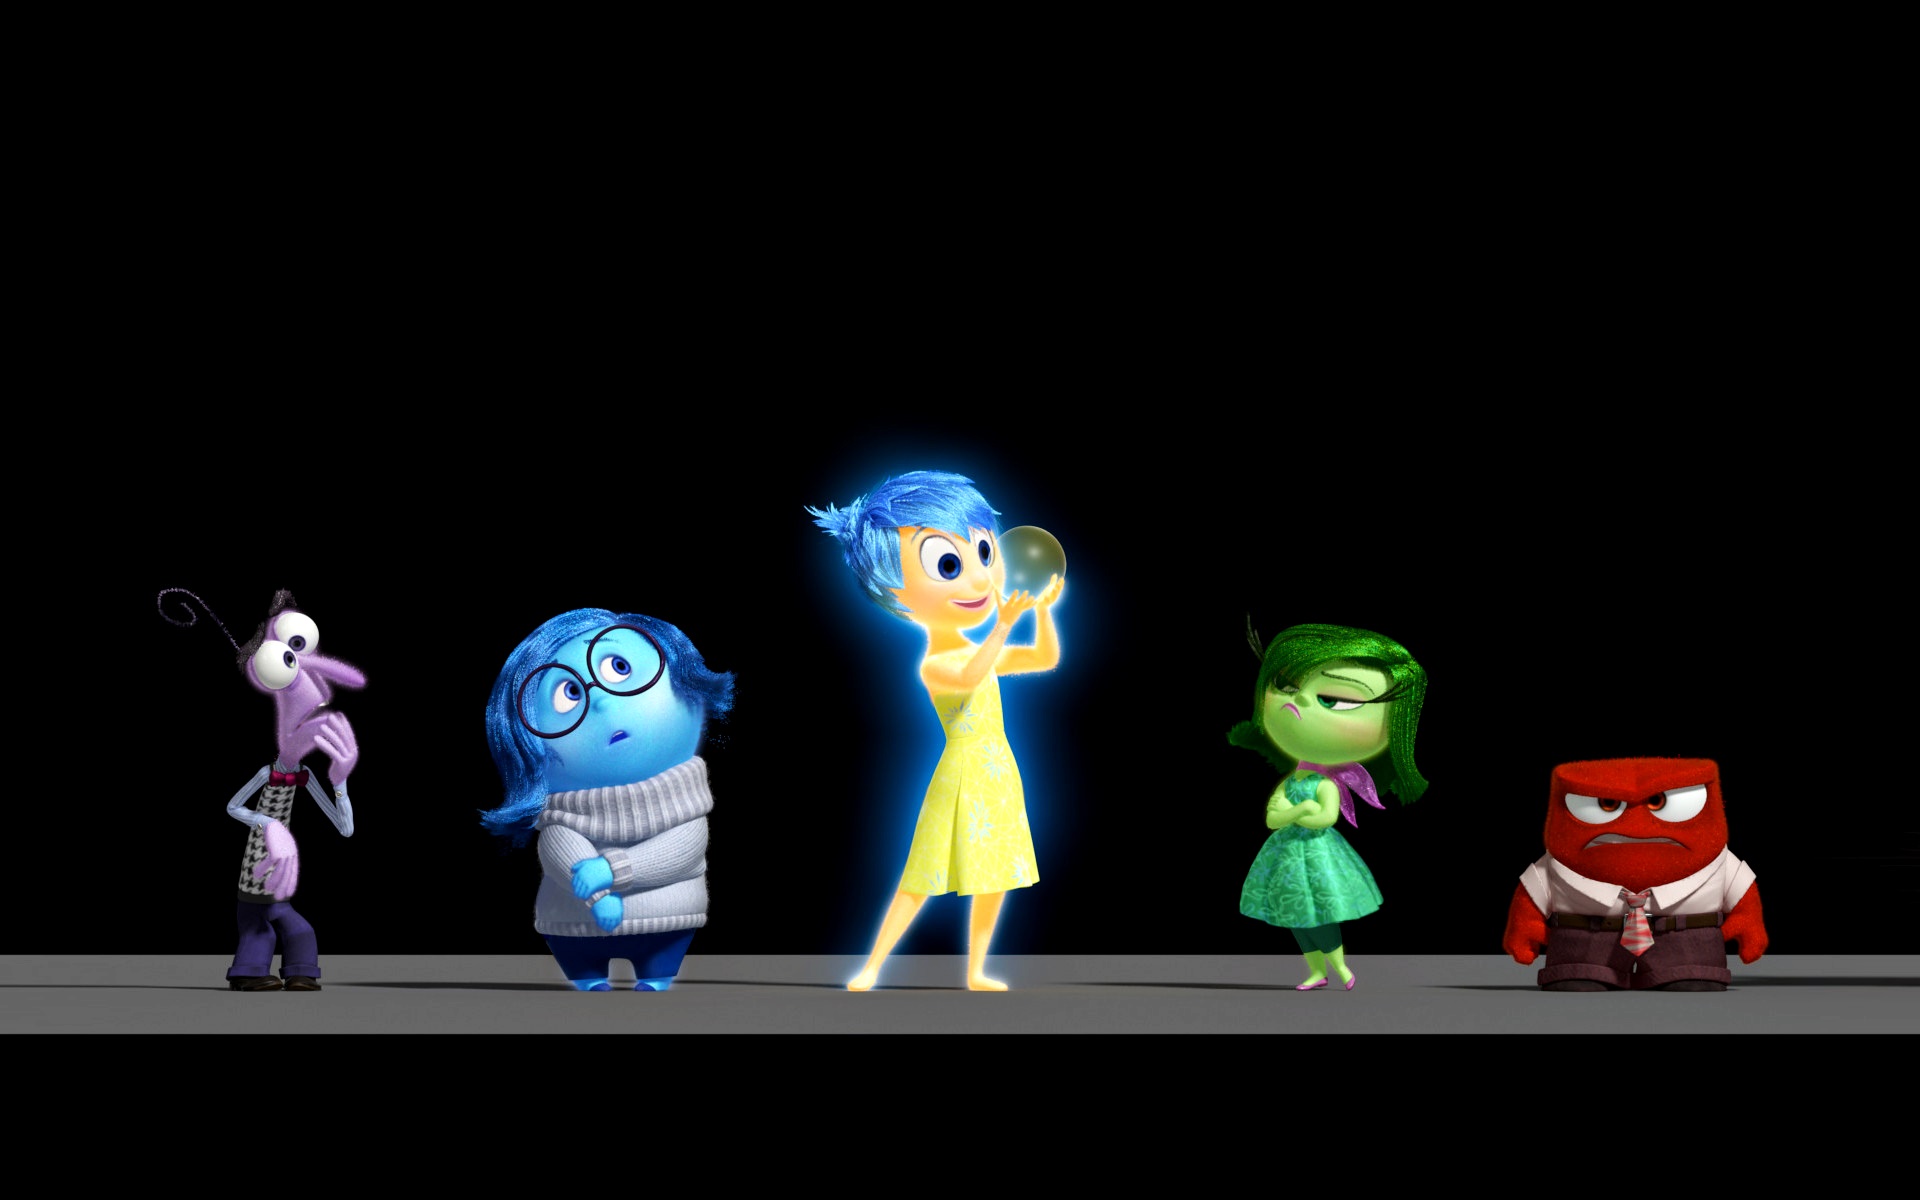 Free Download Pixar Inside Out Hd Wallpaper Widescreen And Full Hd